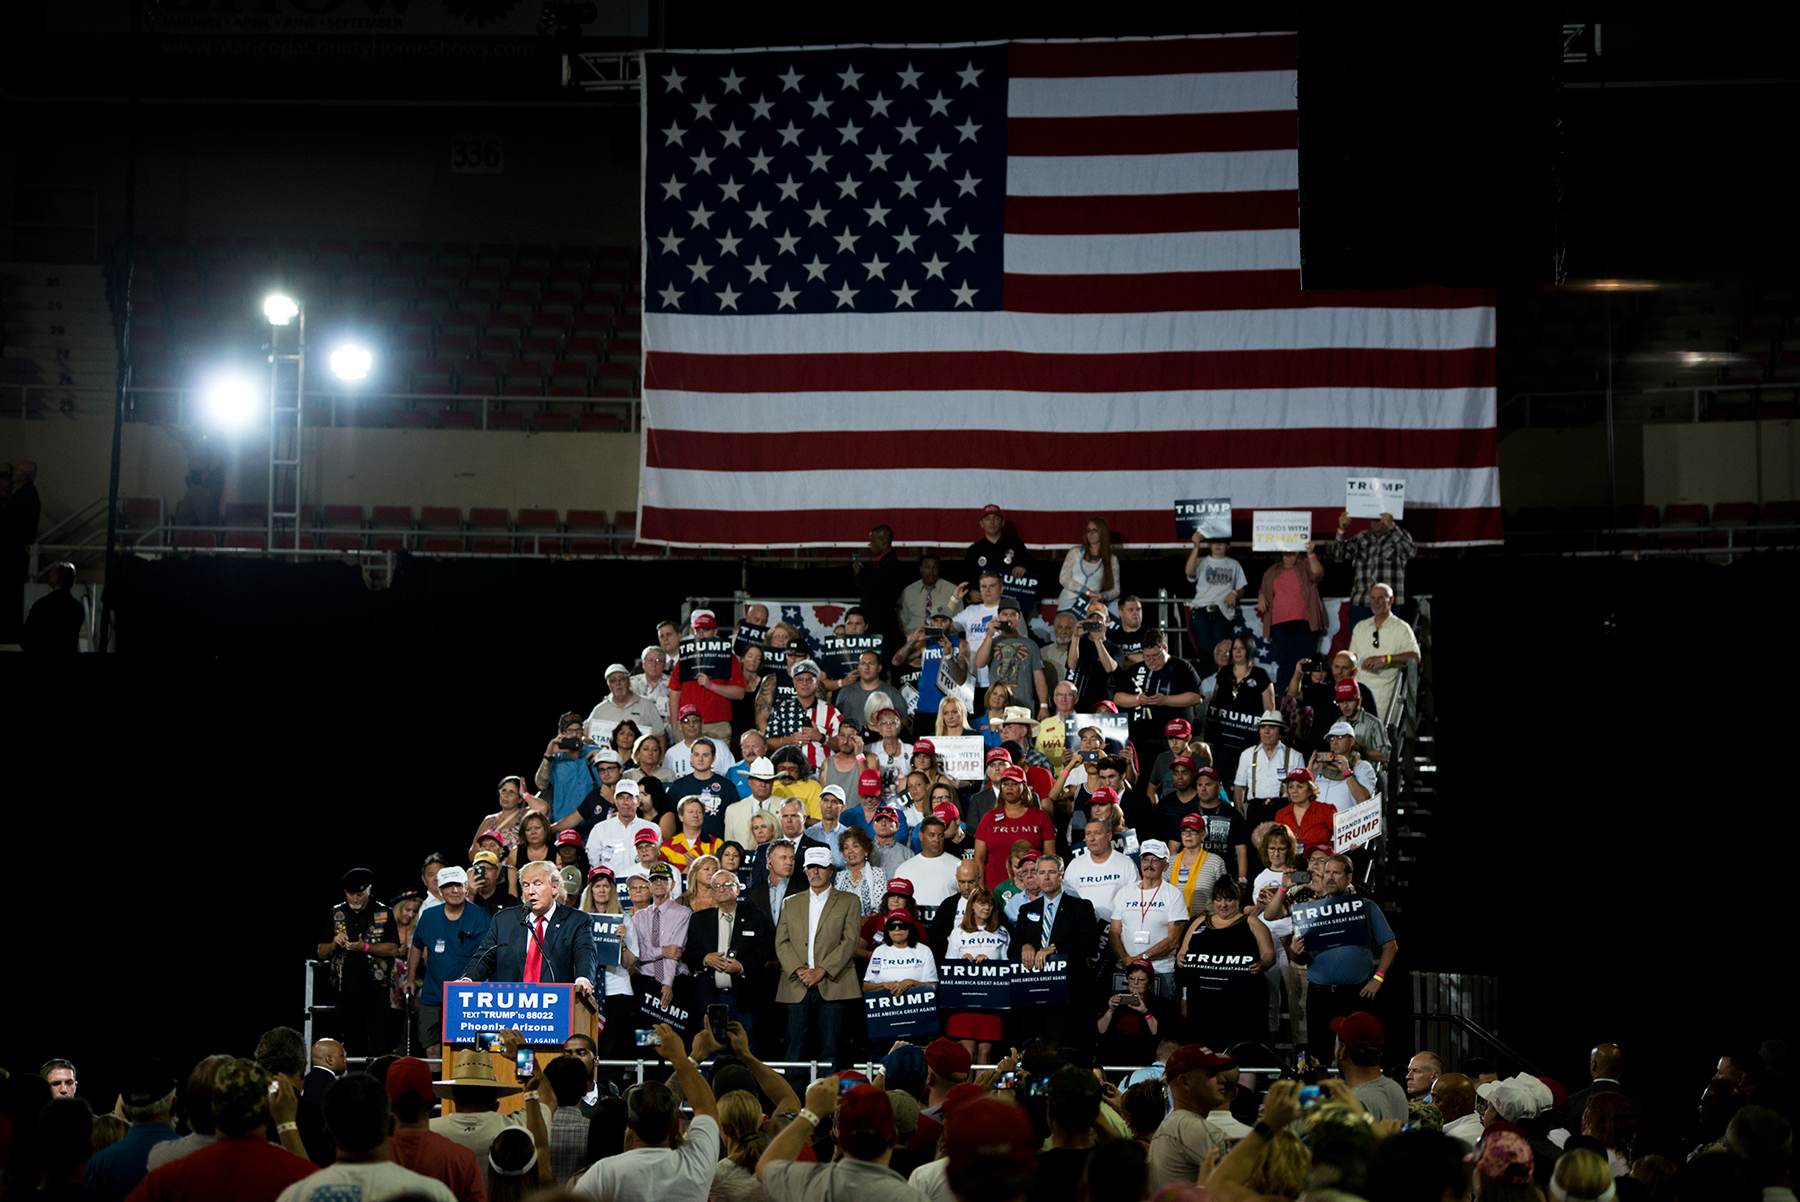 Republican presidential candidate Donald Trump holds a rally in Phoenix. Trump has claimed fraudulent voters will be able to cast multiple ballots without voter ID laws in place. (Roman Knertser/News21)